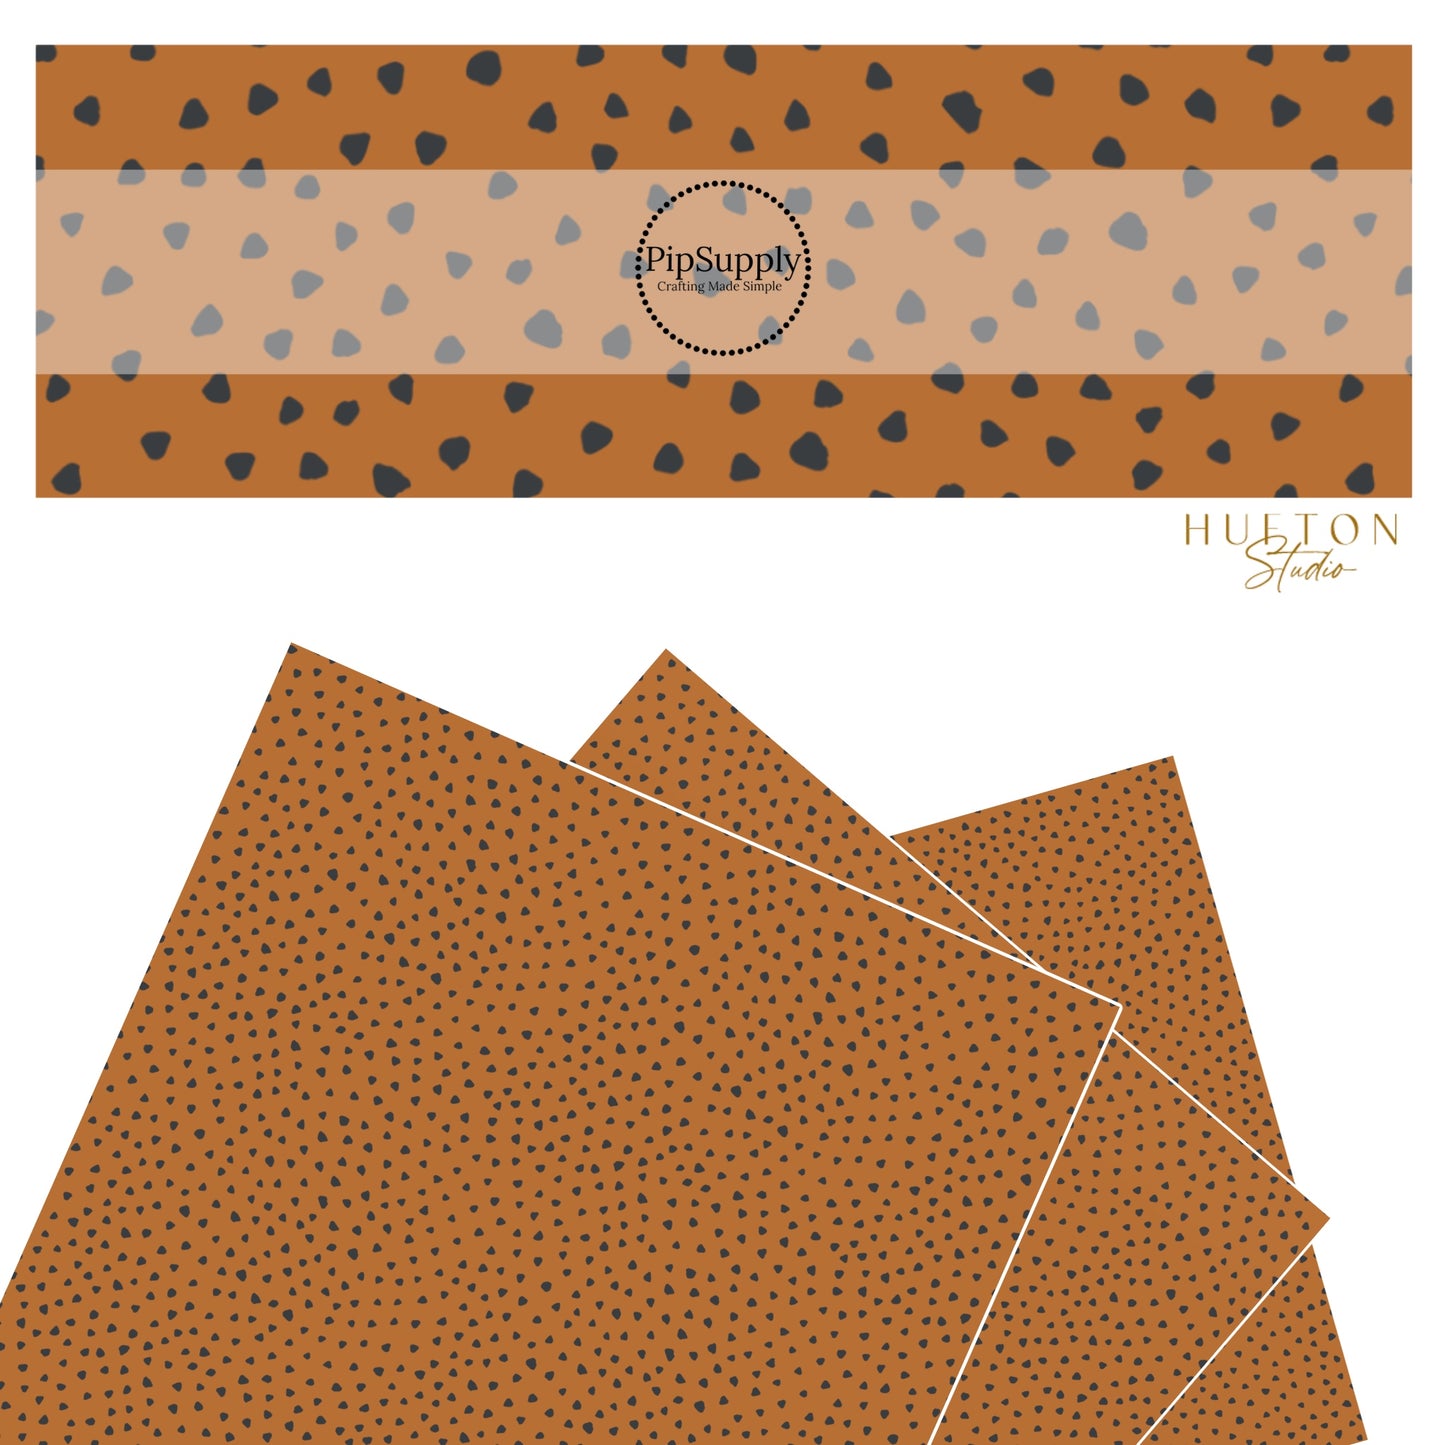 These speckled themed faux leather sheets contain the following design elements: small black speckled dots on brown. Our CPSIA compliant faux leather sheets or rolls can be used for all types of crafting projects.